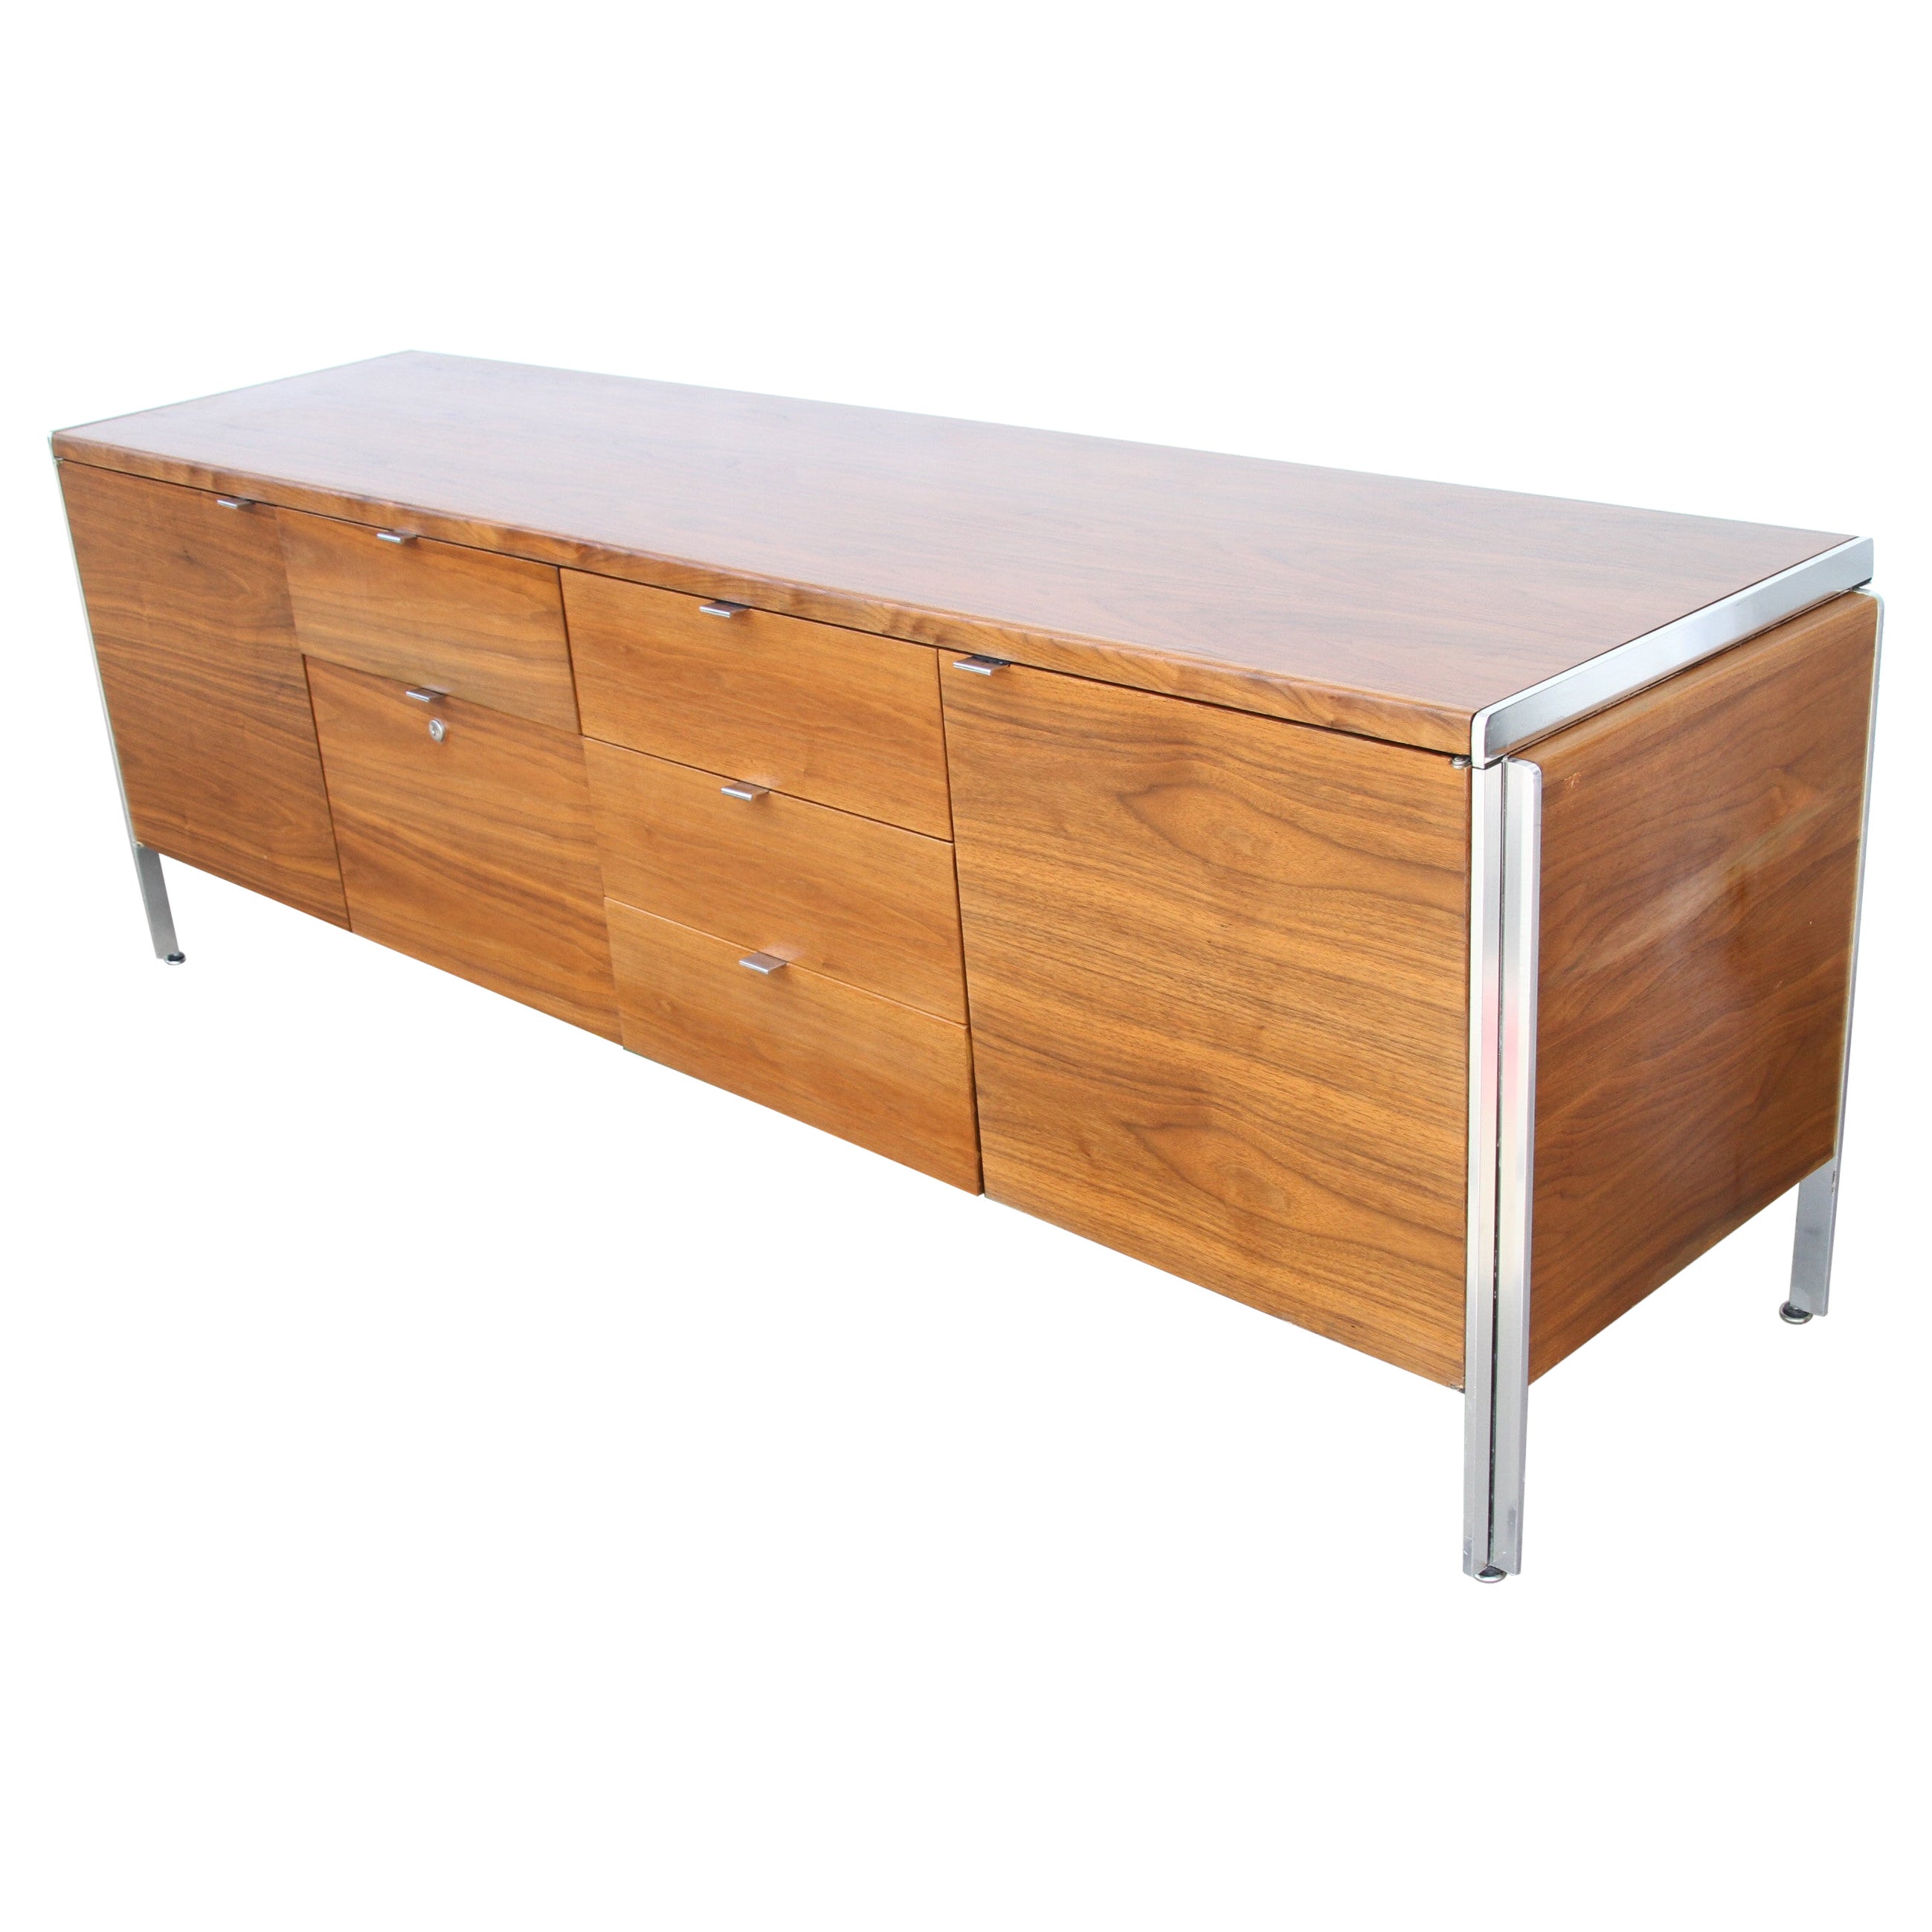 72"  Mid-Century Modern Credenza by Alexis Yermakov for Stow Davis For Sale